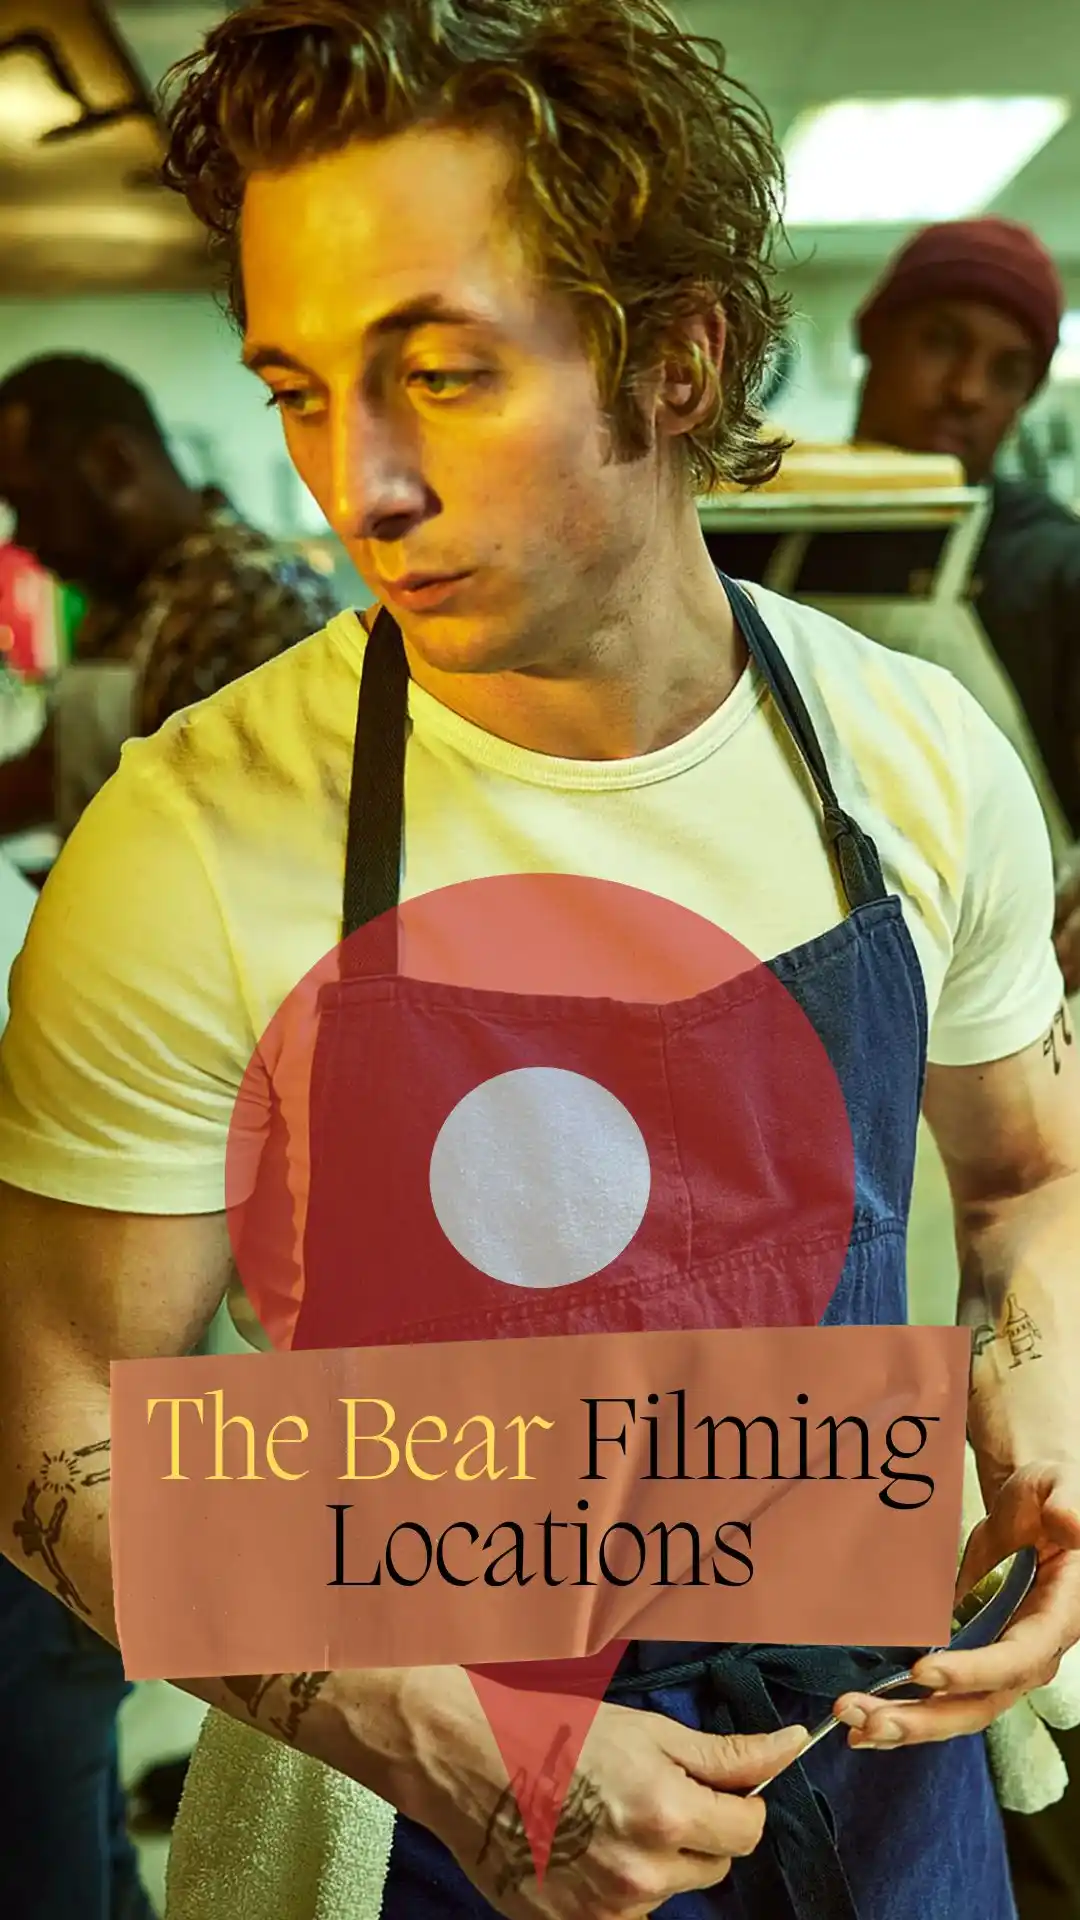 The Bear Filming Locations